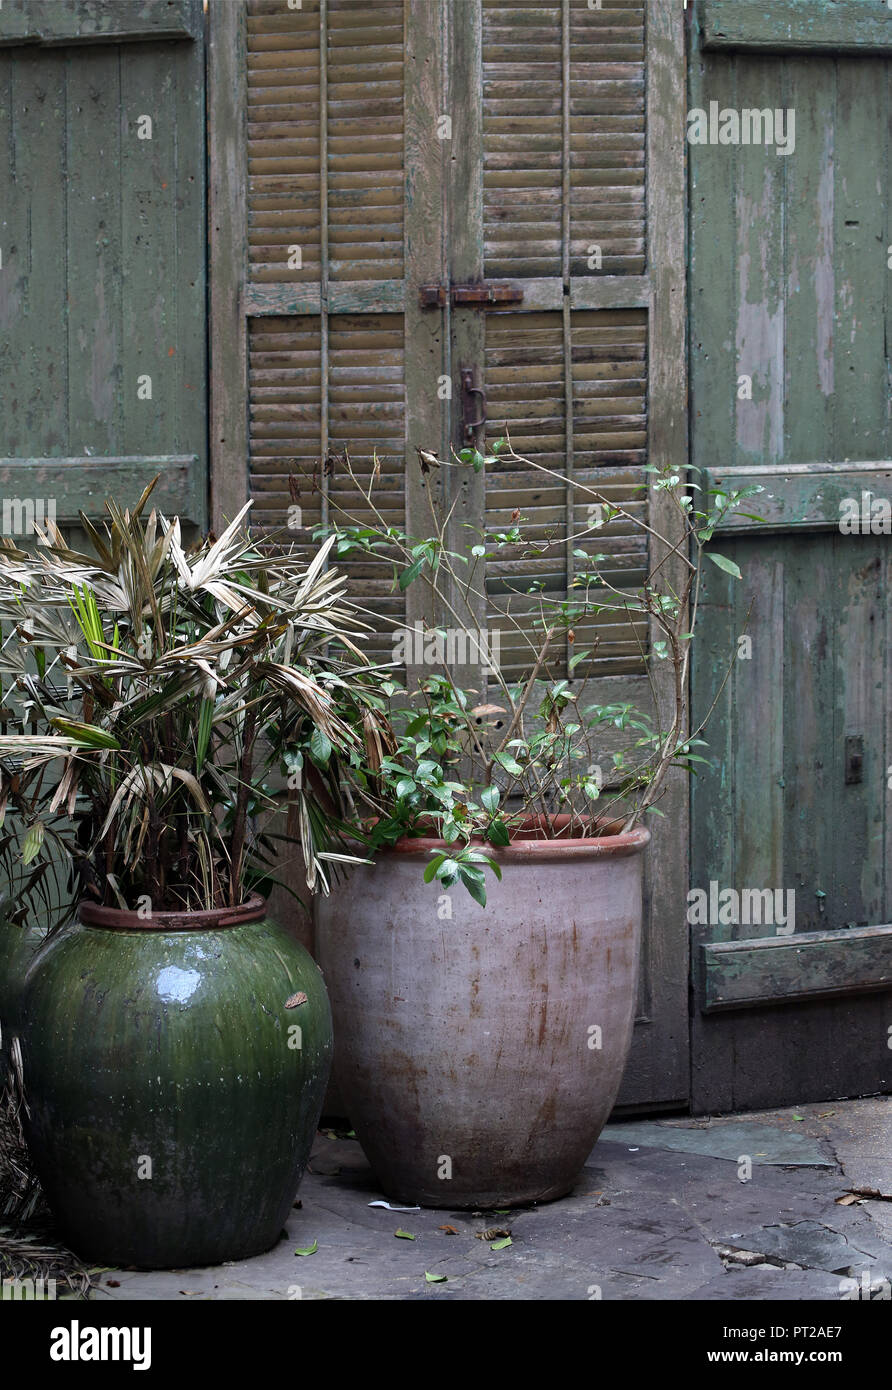 ceramic planters with rustic wooden shutter and old doors in background Stock Photo